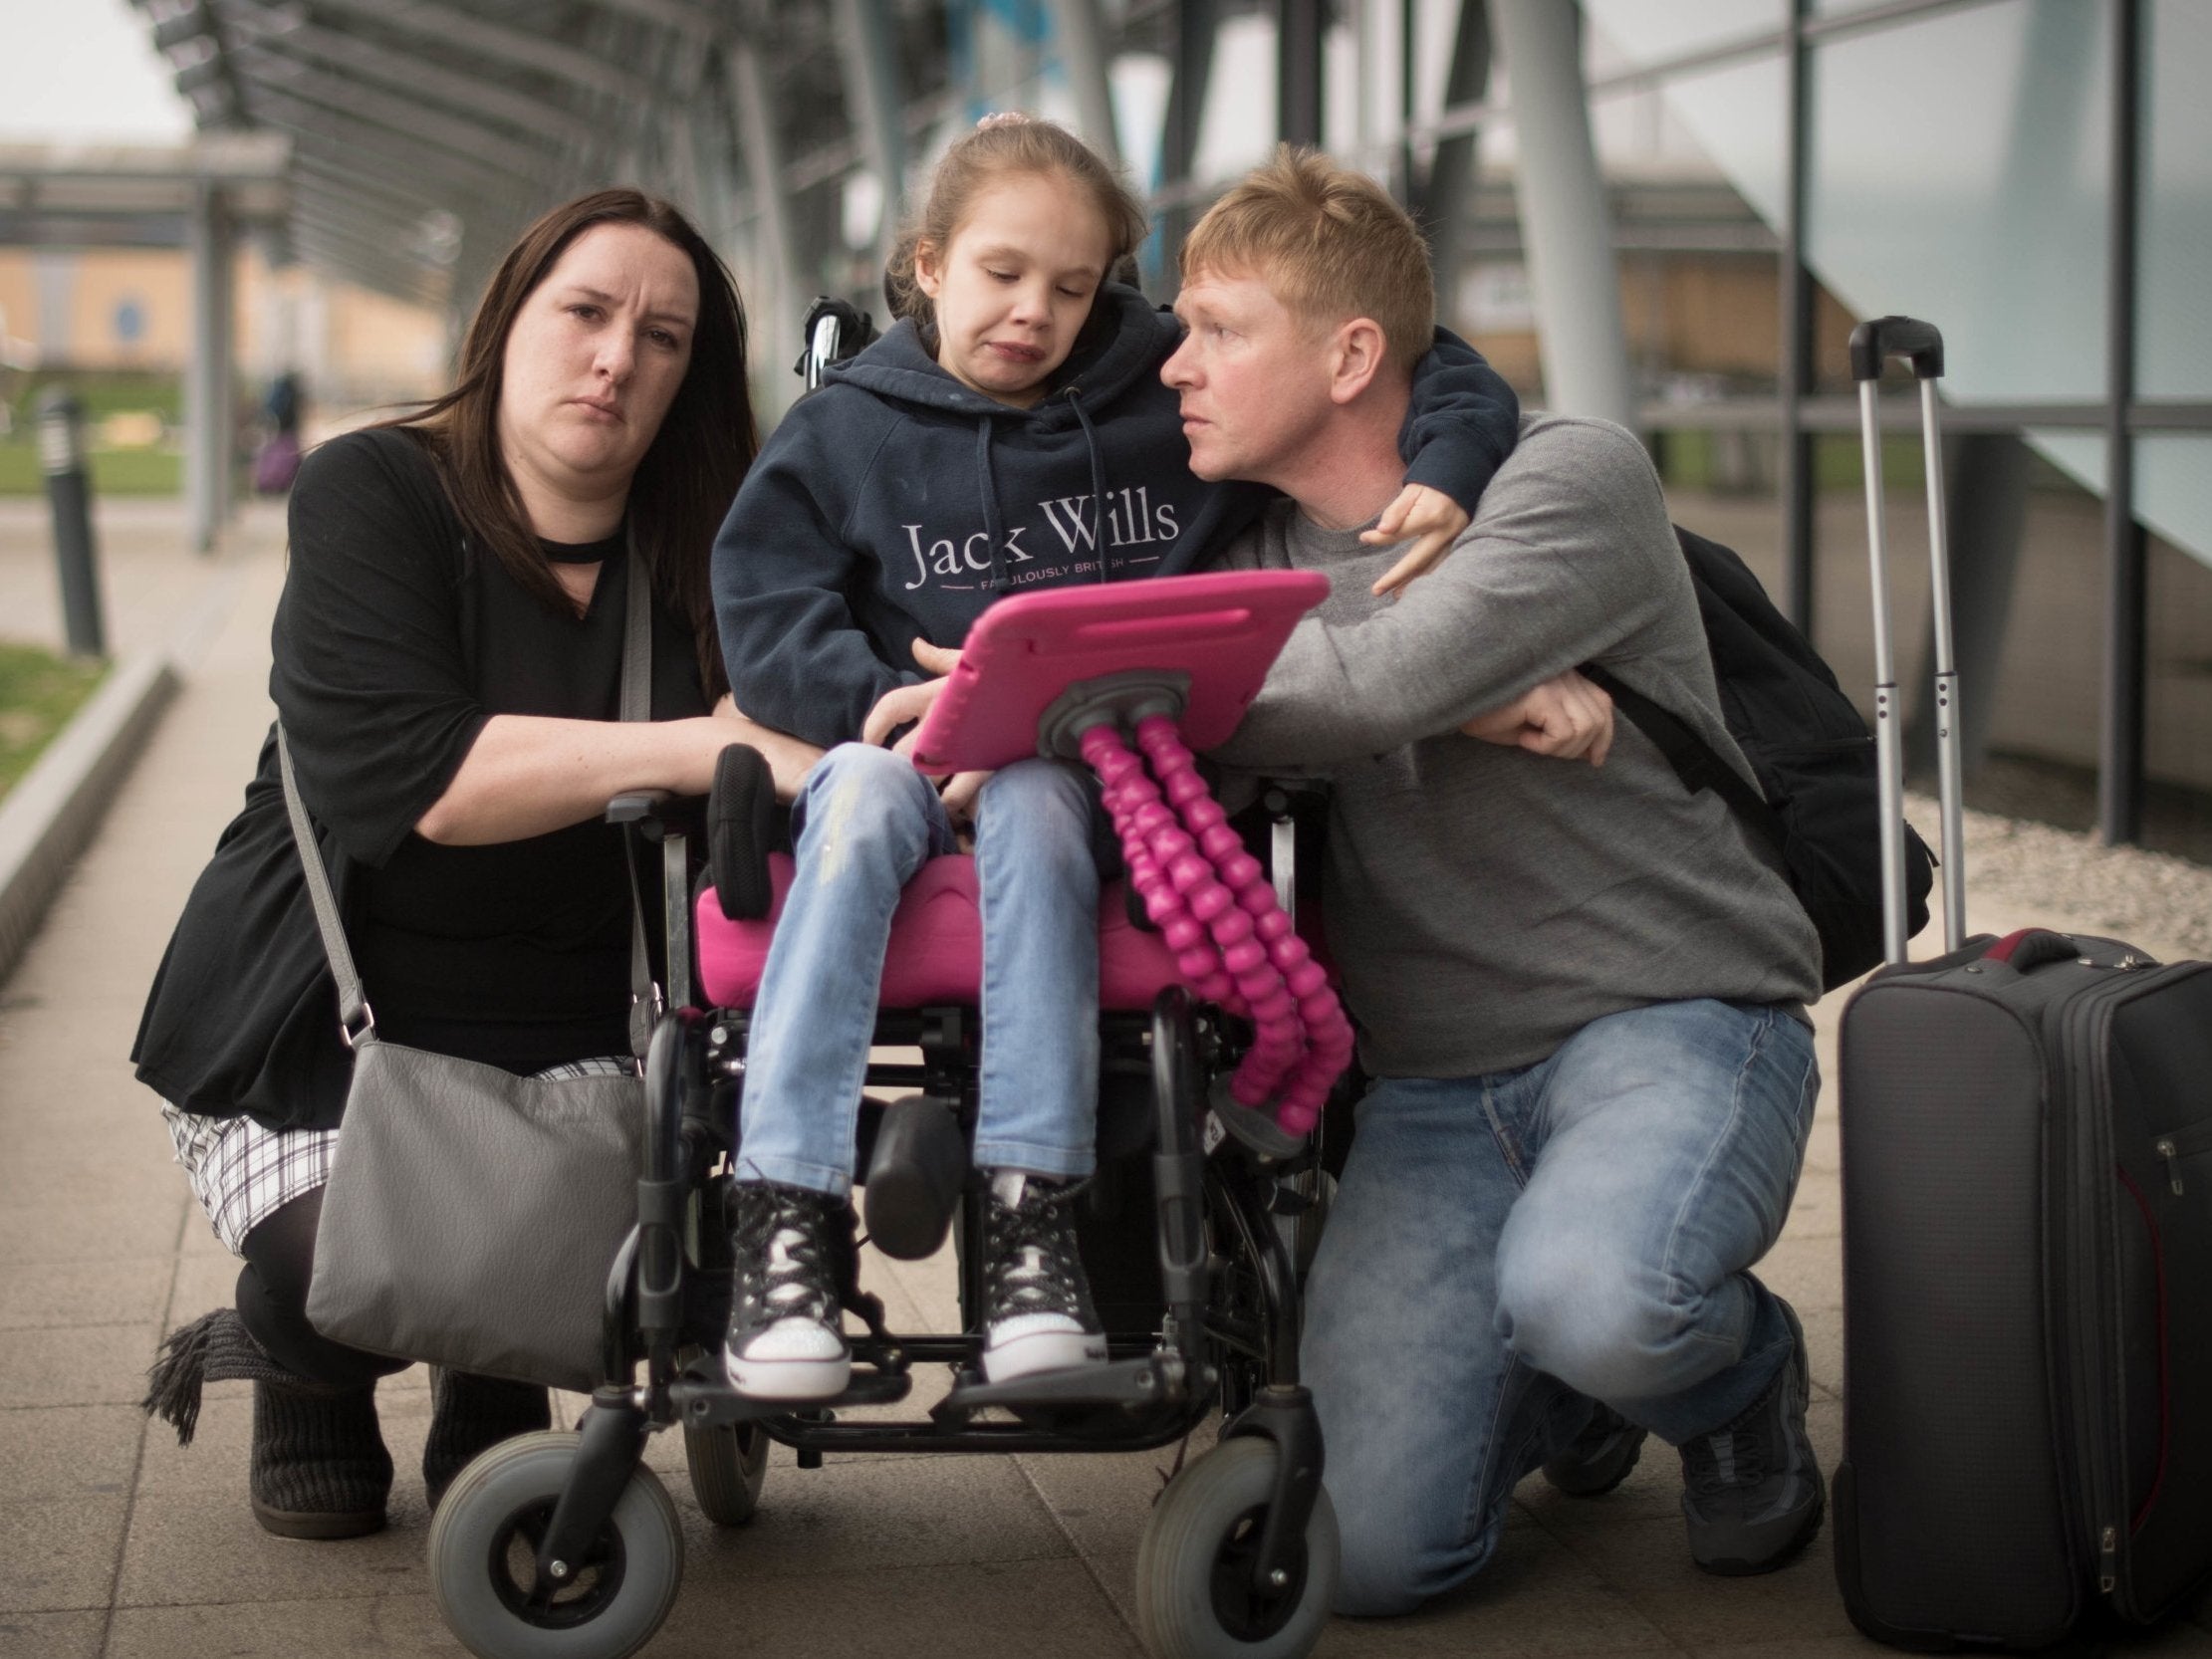 Mother left in tears after medical cannabis for epileptic daughter confiscated at airport